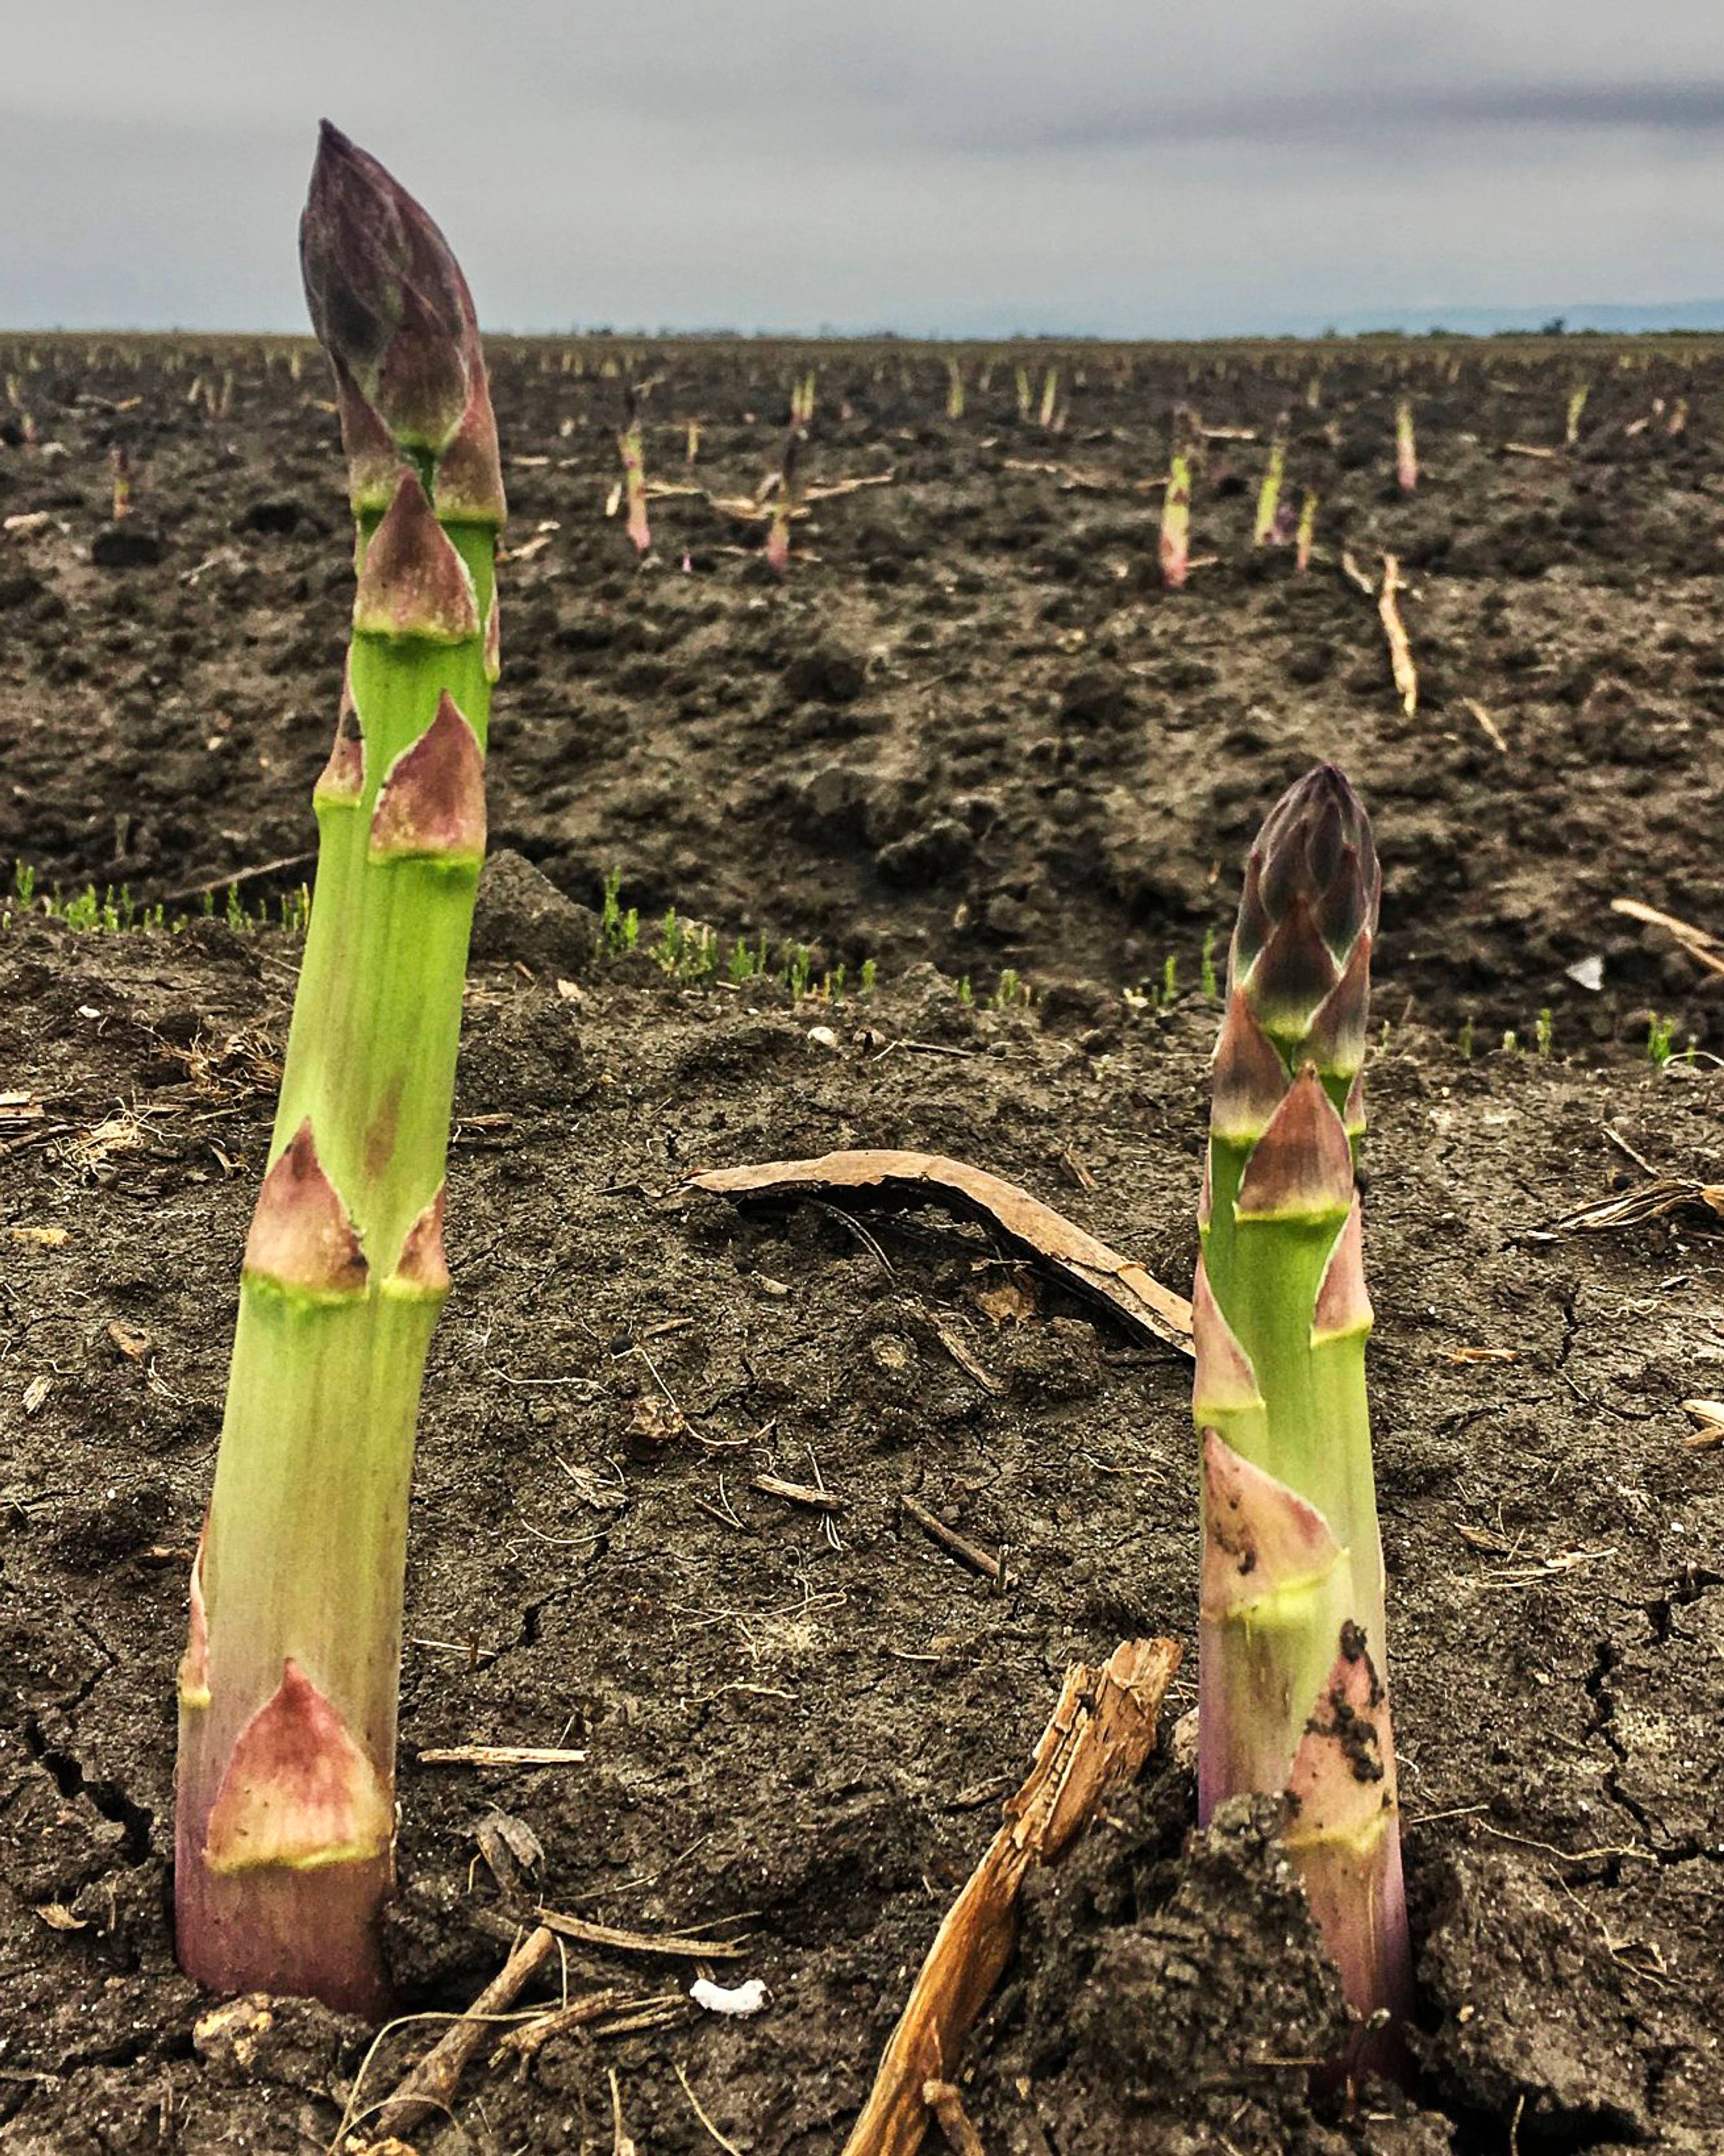 large and small asparagus heads stickup up out of the ground